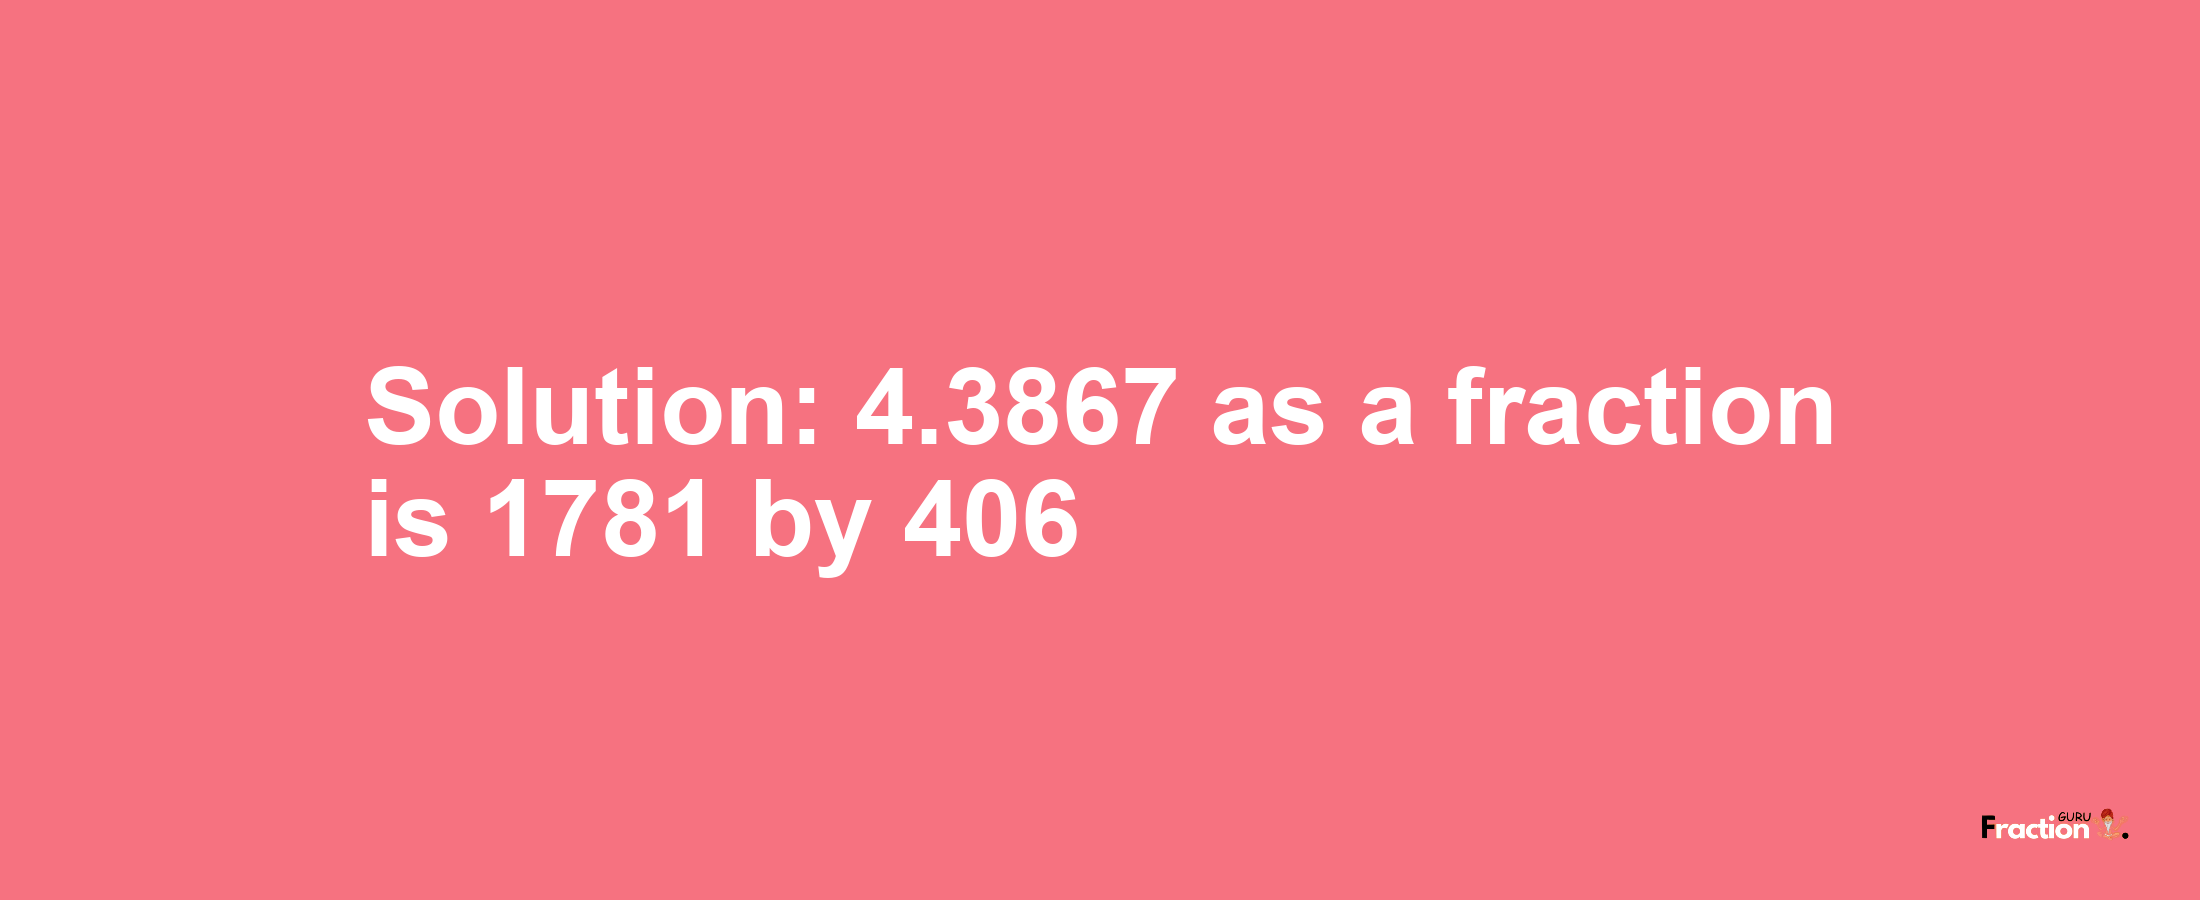 Solution:4.3867 as a fraction is 1781/406